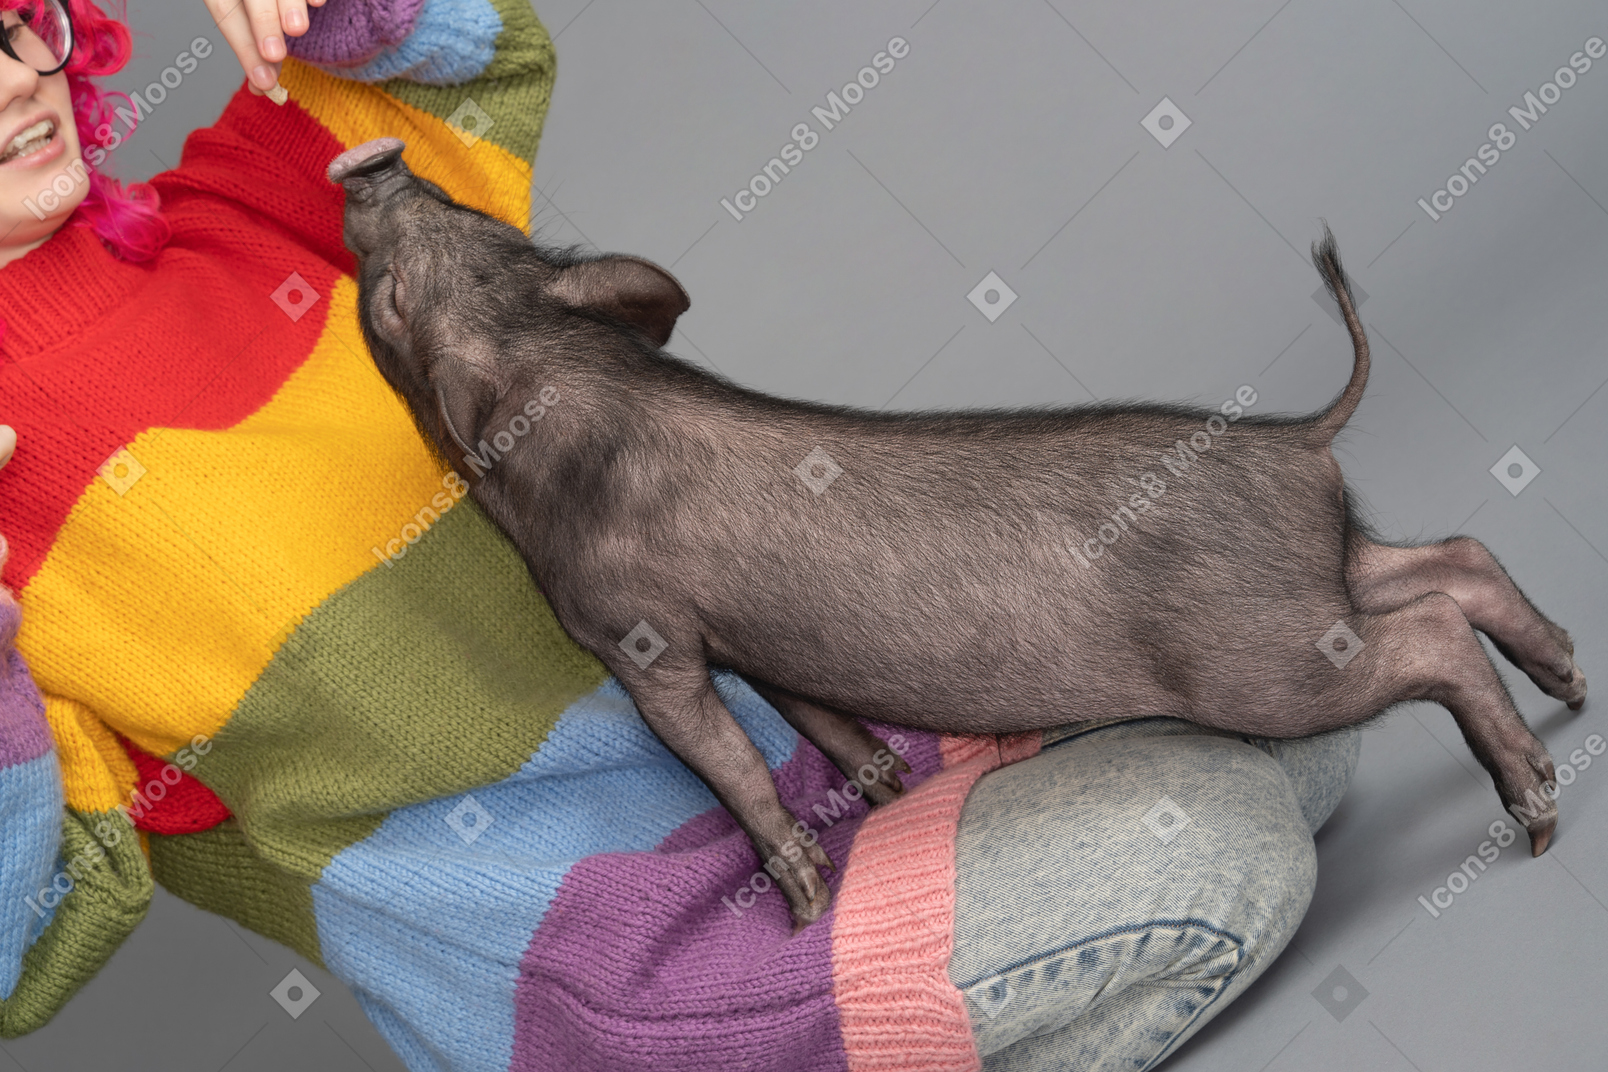 A young female playing wit a tiny pet pig